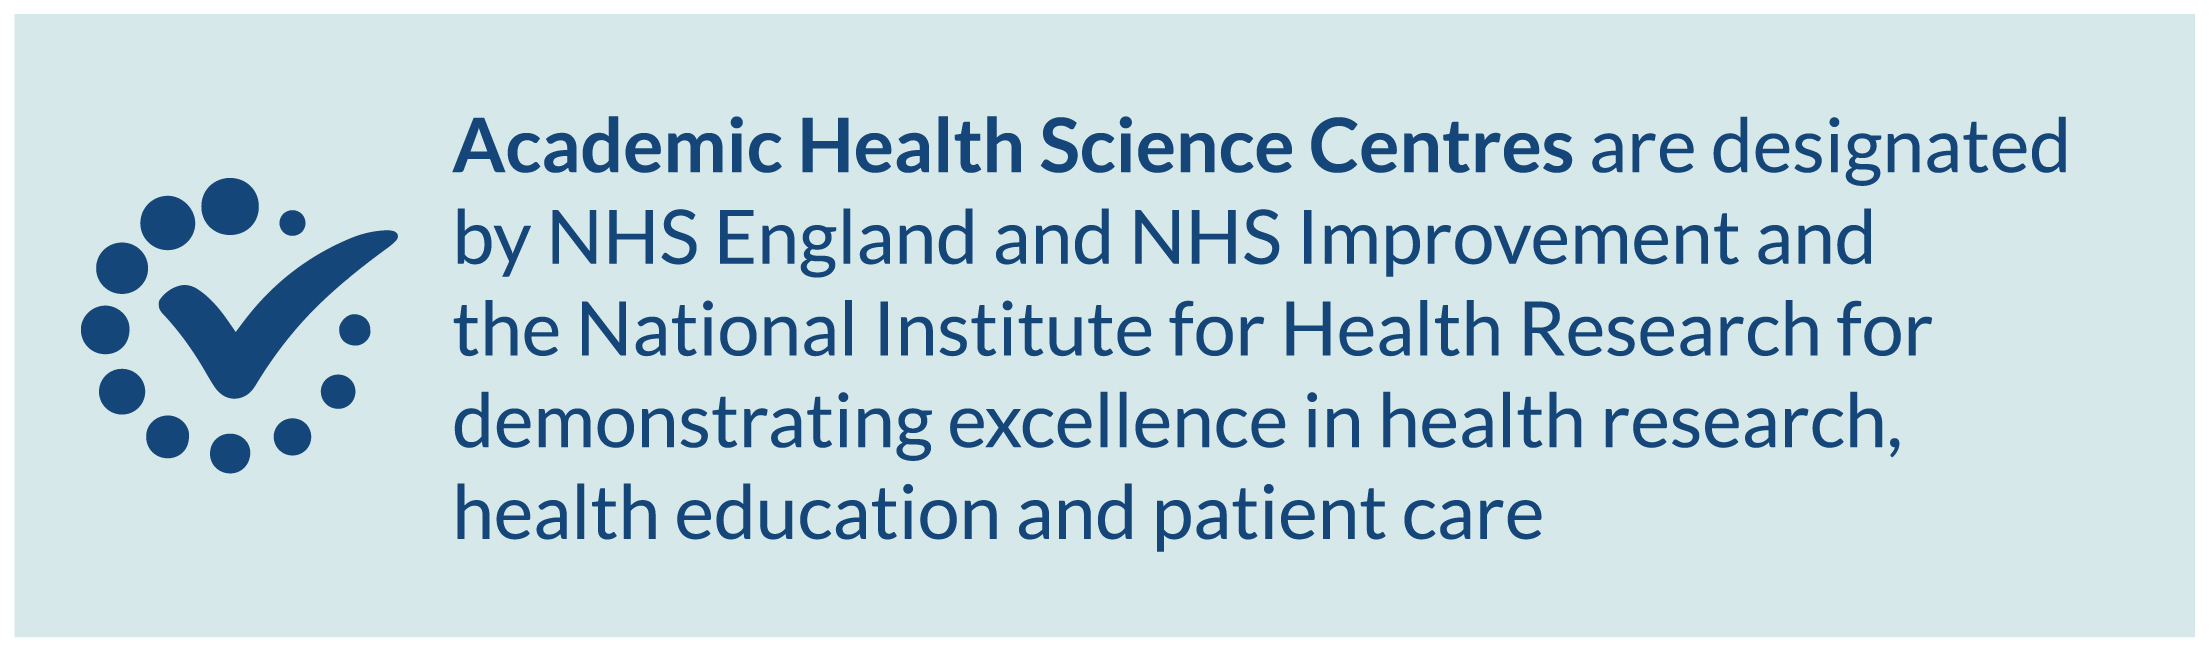 A banner explaining that academic health science centres are designated by NHS England and NHS Improvement and the National Institute for Health Research for demonstrating excellence in health research, health education and patient care. 